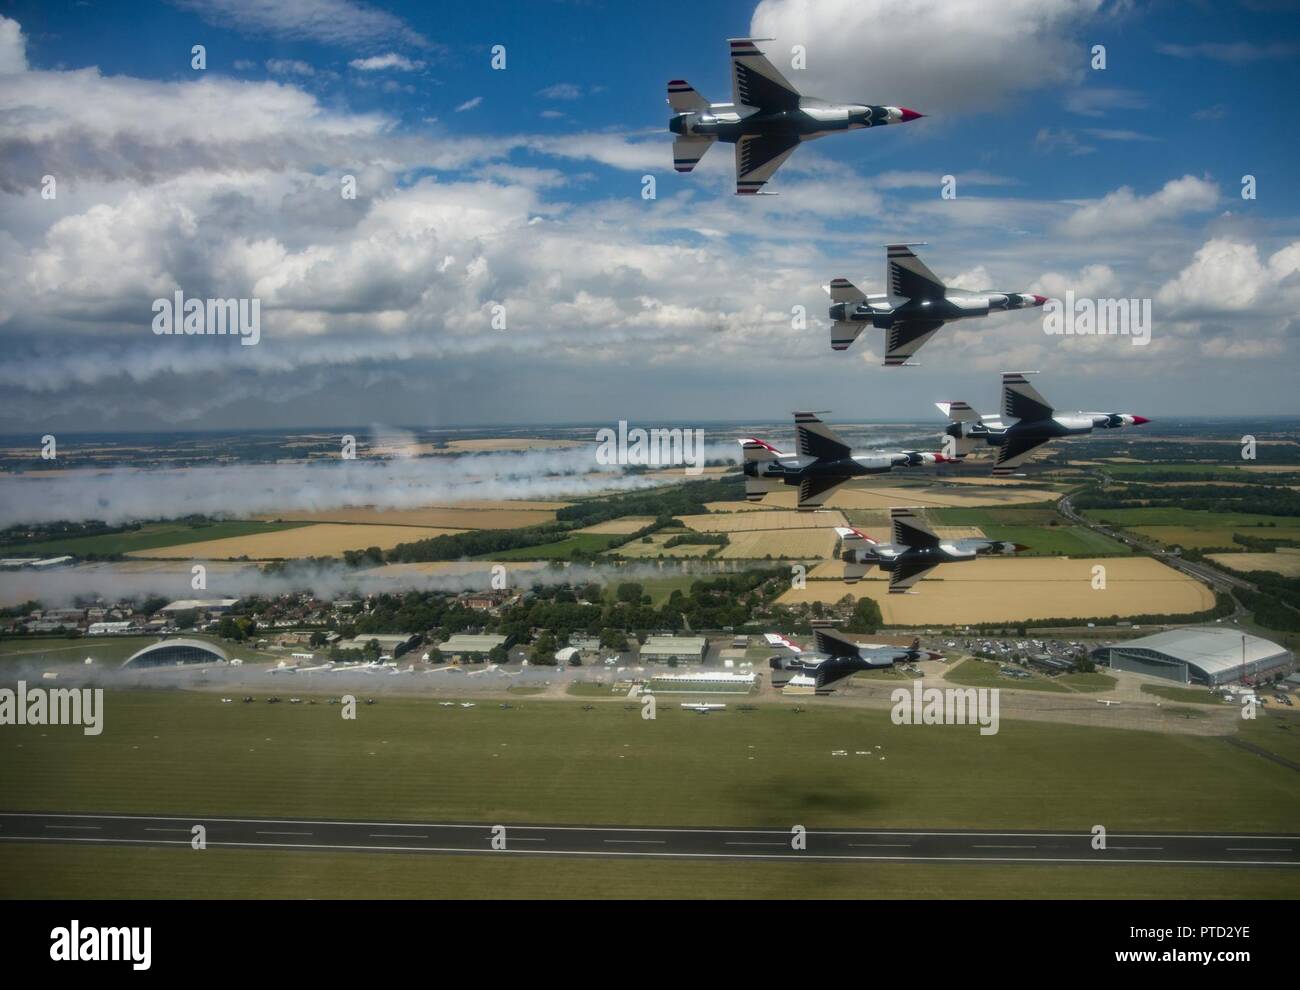 The U.S. Air Force Thunderbirds fly over RAF Duxford, England, July 10, 2017. The Thunderbirds flew over several bases and landmarks in preparation for the 2017 Royal International Air Tattoo being held at RAF Fairford, England. The Air Force is celebrating its 70th Anniversary in 2017. Stock Photo